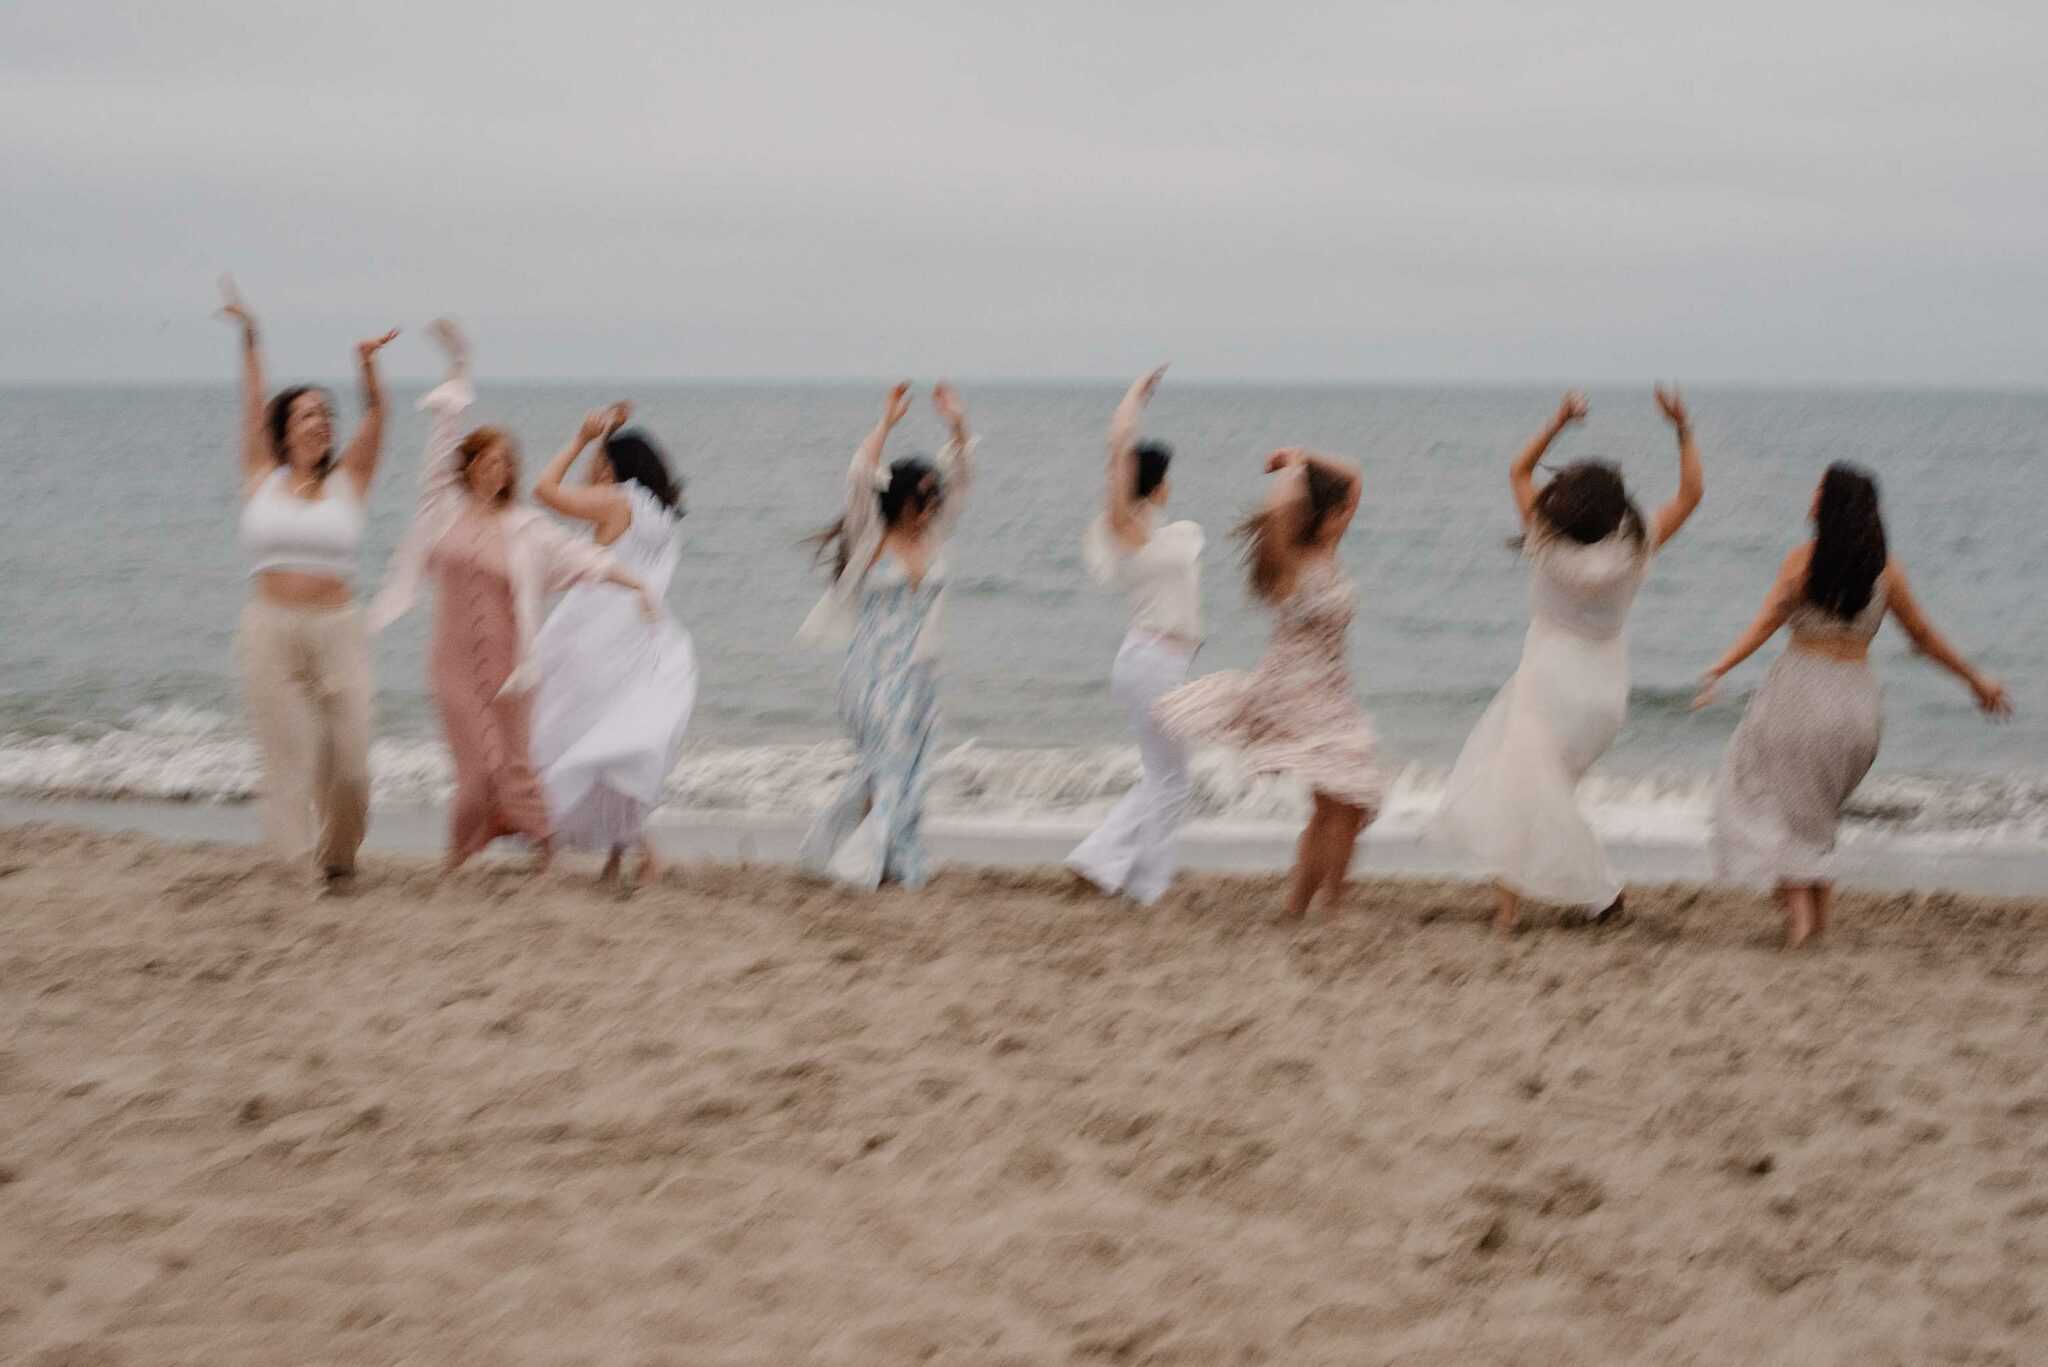 women dancing at a healing trip and self discovery retreat like experience